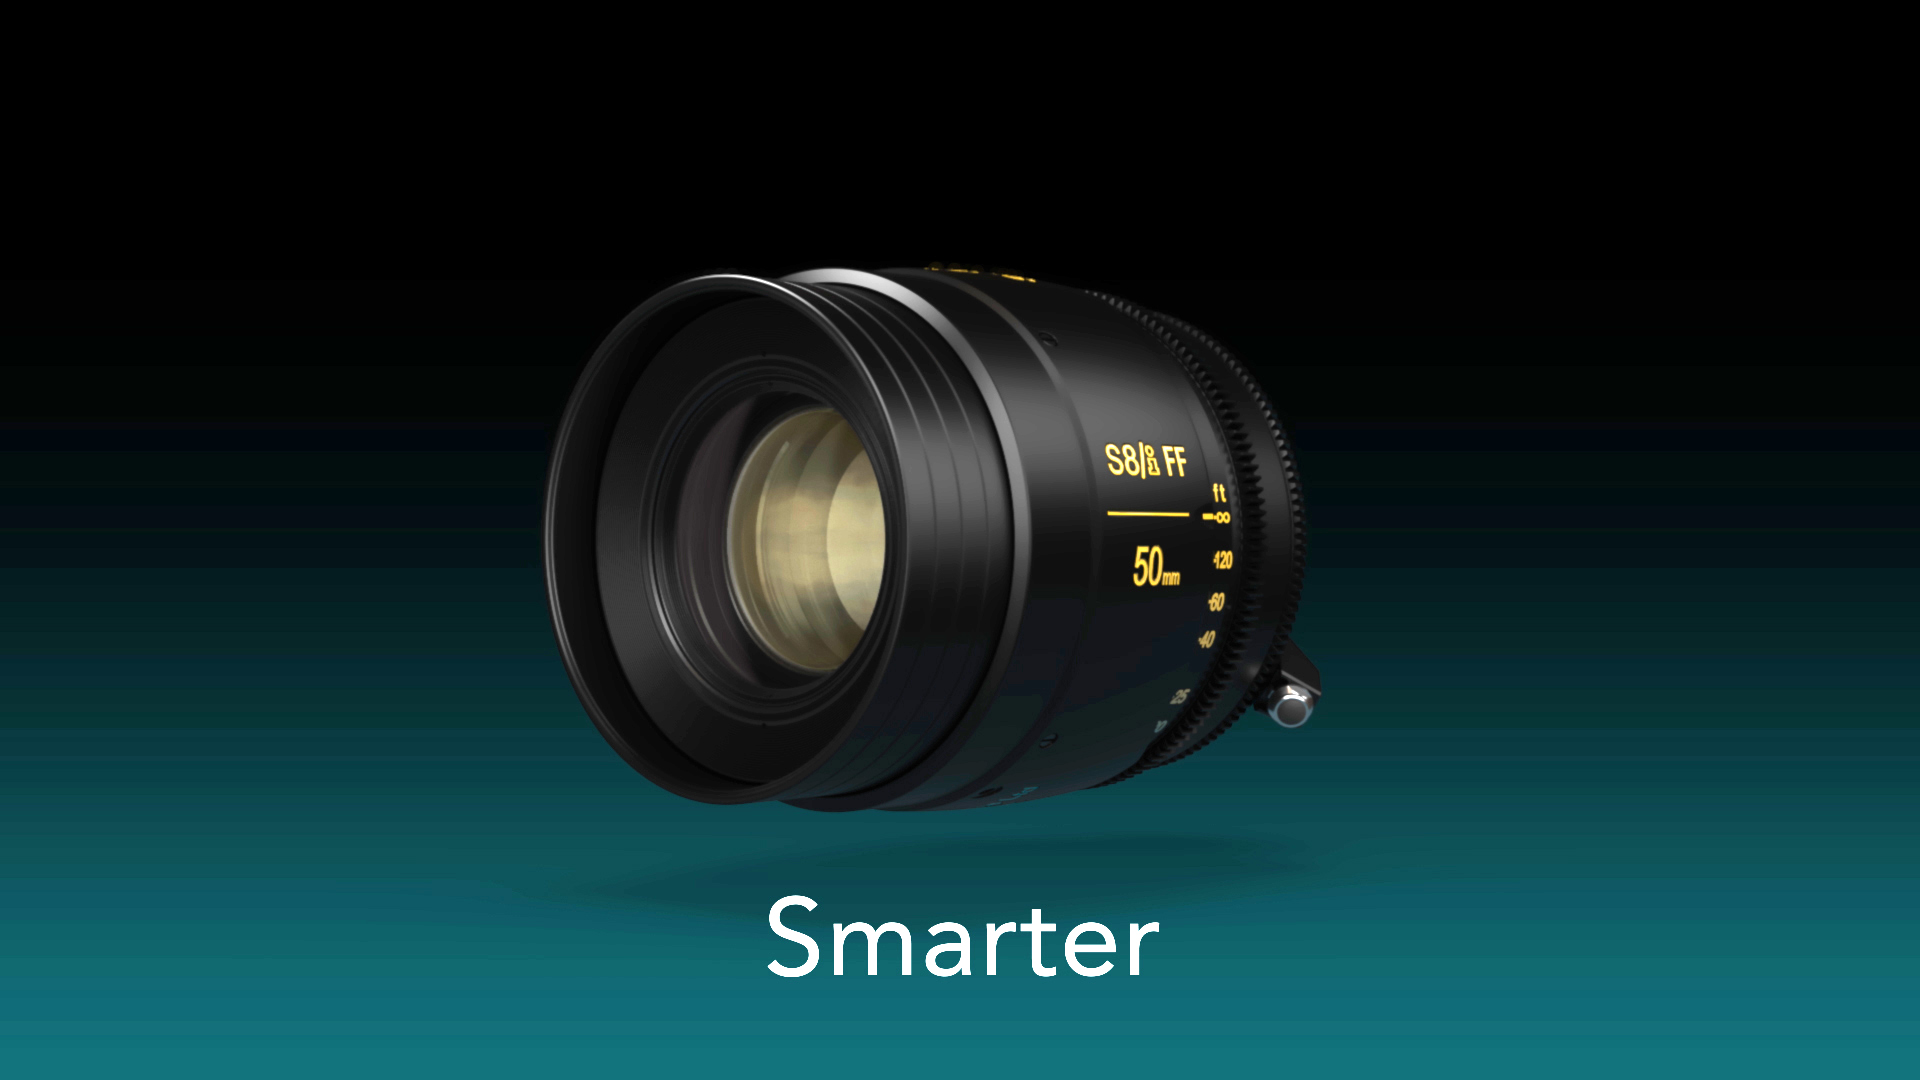 A 3/4 angle shot of a Cooke camera lense with the text Smarter below